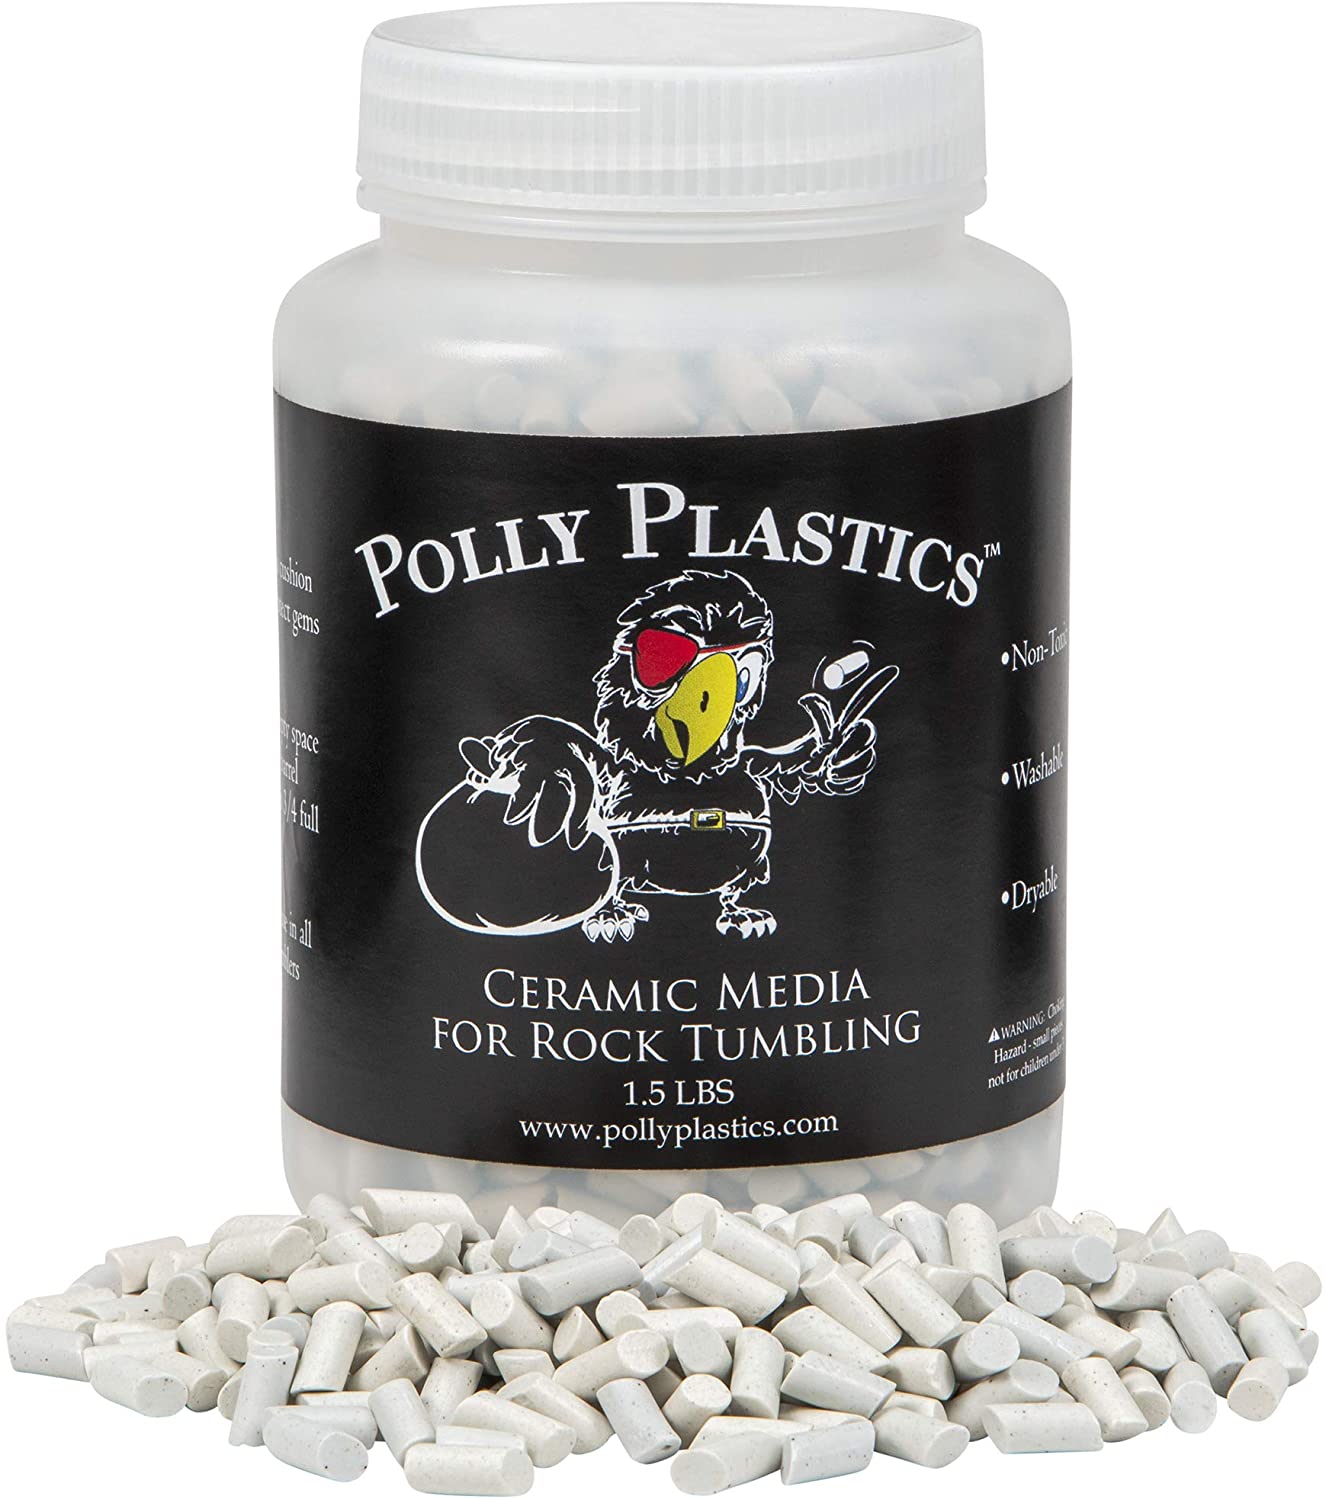 Polly Plastics Rock Tumbling Ceramic Filler Media (Small Cylinder Size) Non-Abrasive Ceramic Pellets for All Type Tumblers (1.5 lbs) - (For 8 piece(s))